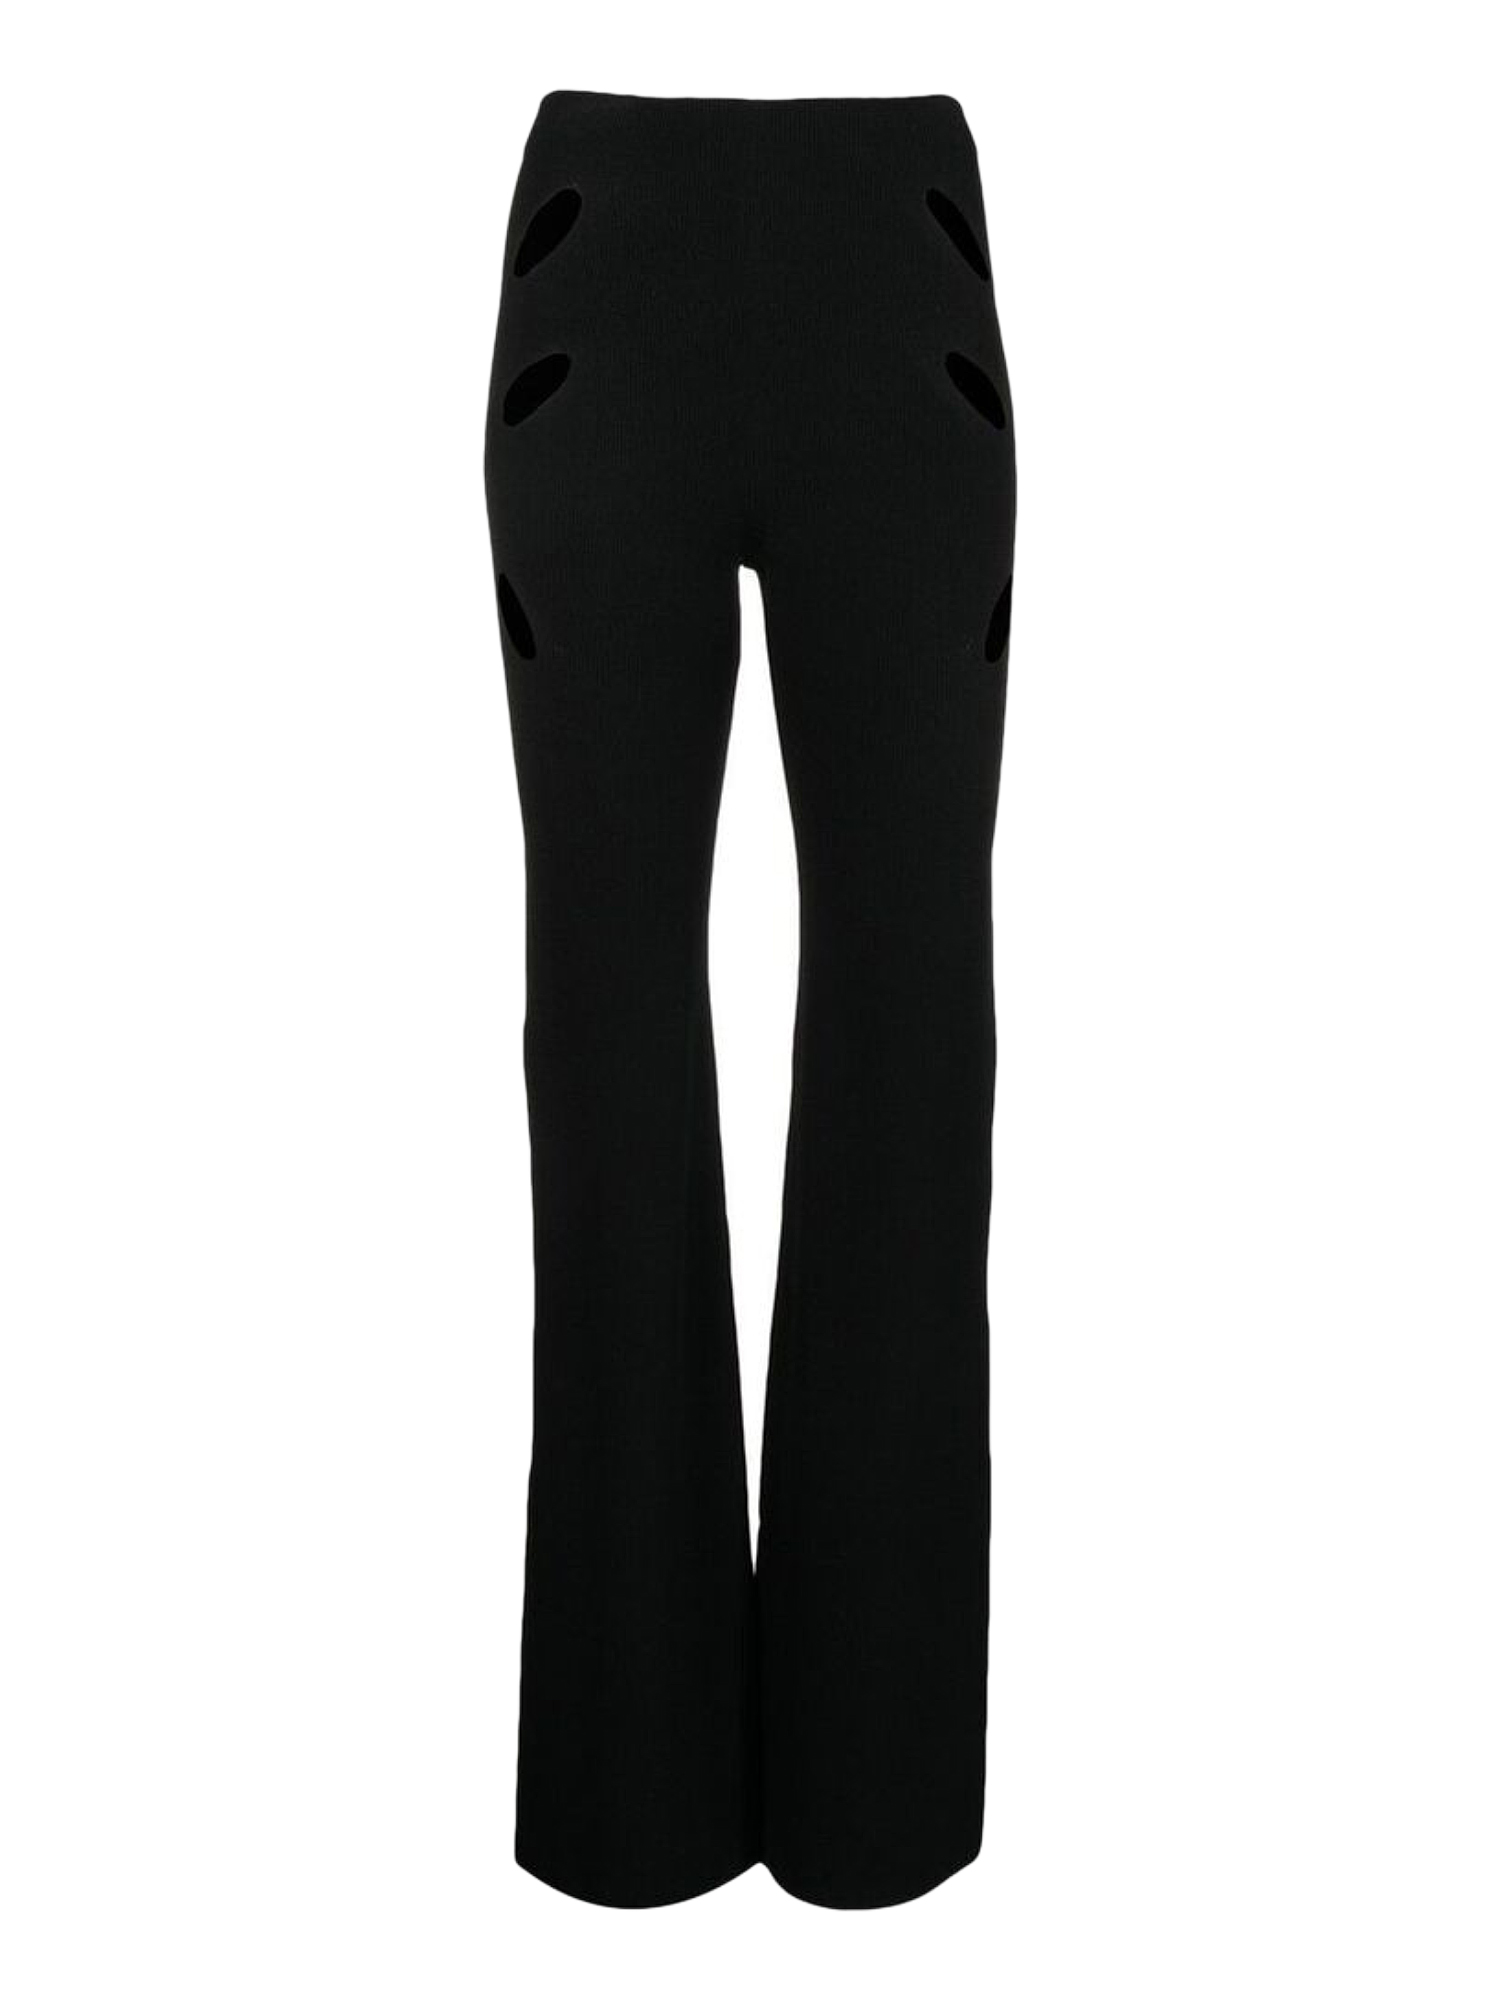 DION LEE WOMEN'S TROUSERS - DION LEE - IN BLACK SYNTHETIC FIBERS